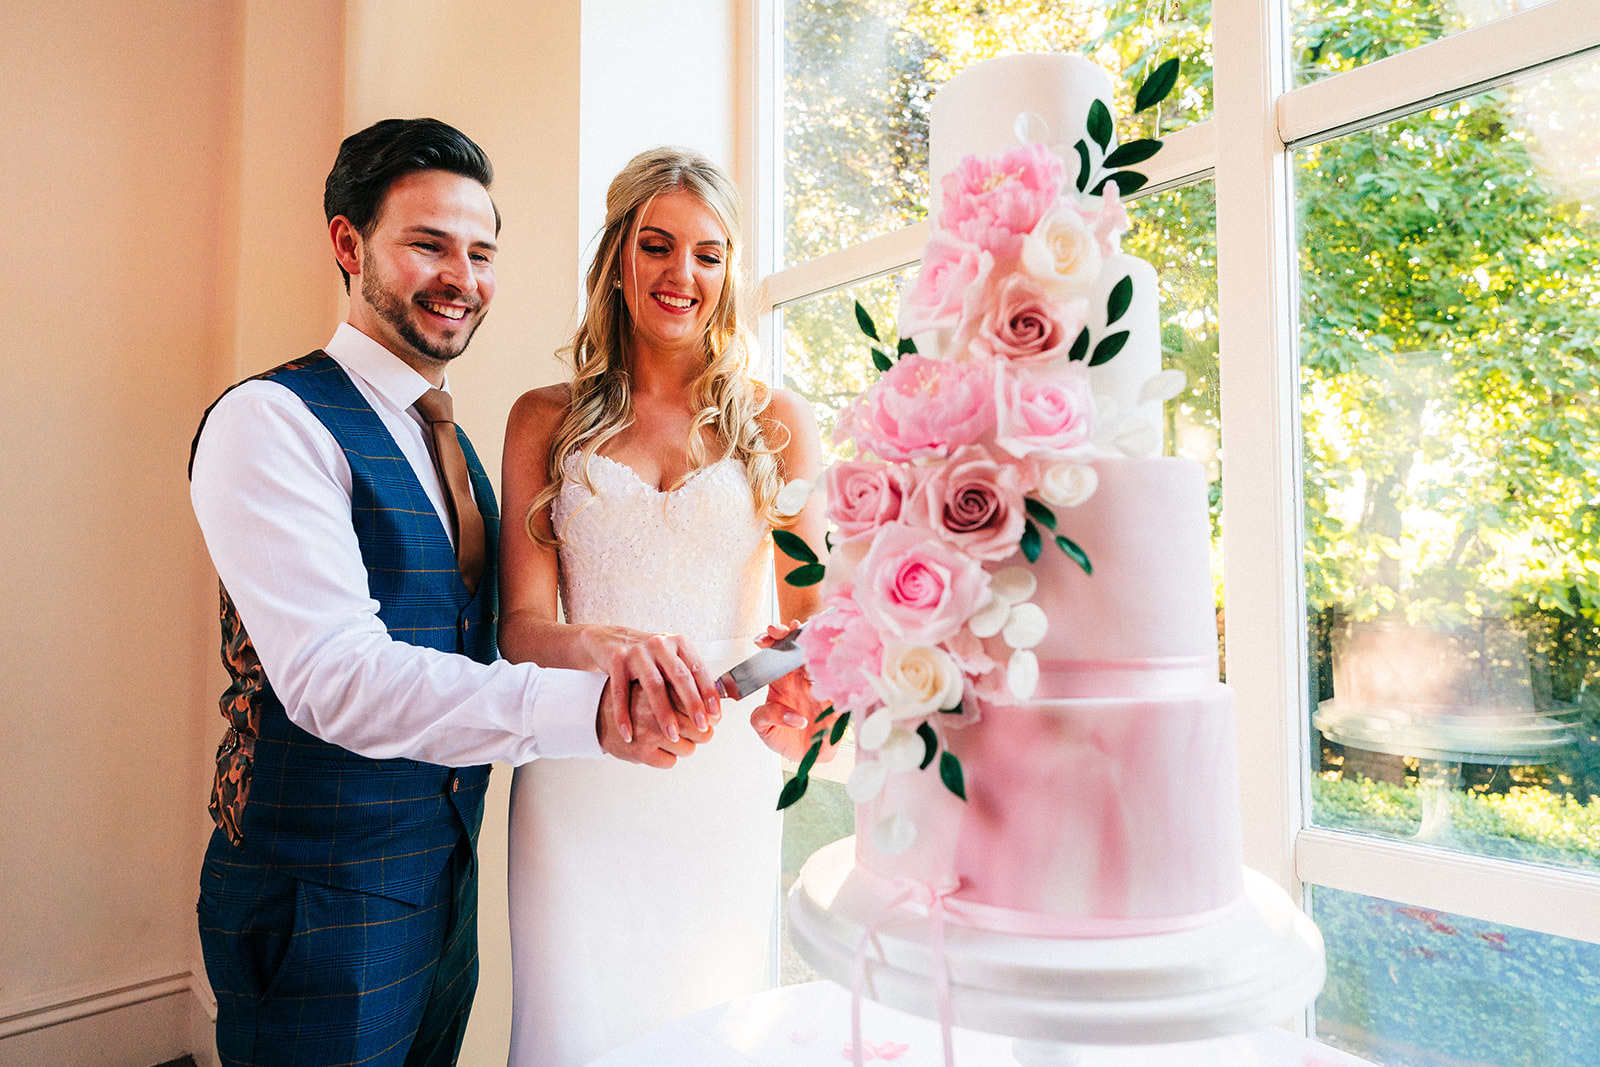 Shottle Hall Wedding Photography - the bride and groom cutting the wedding cake